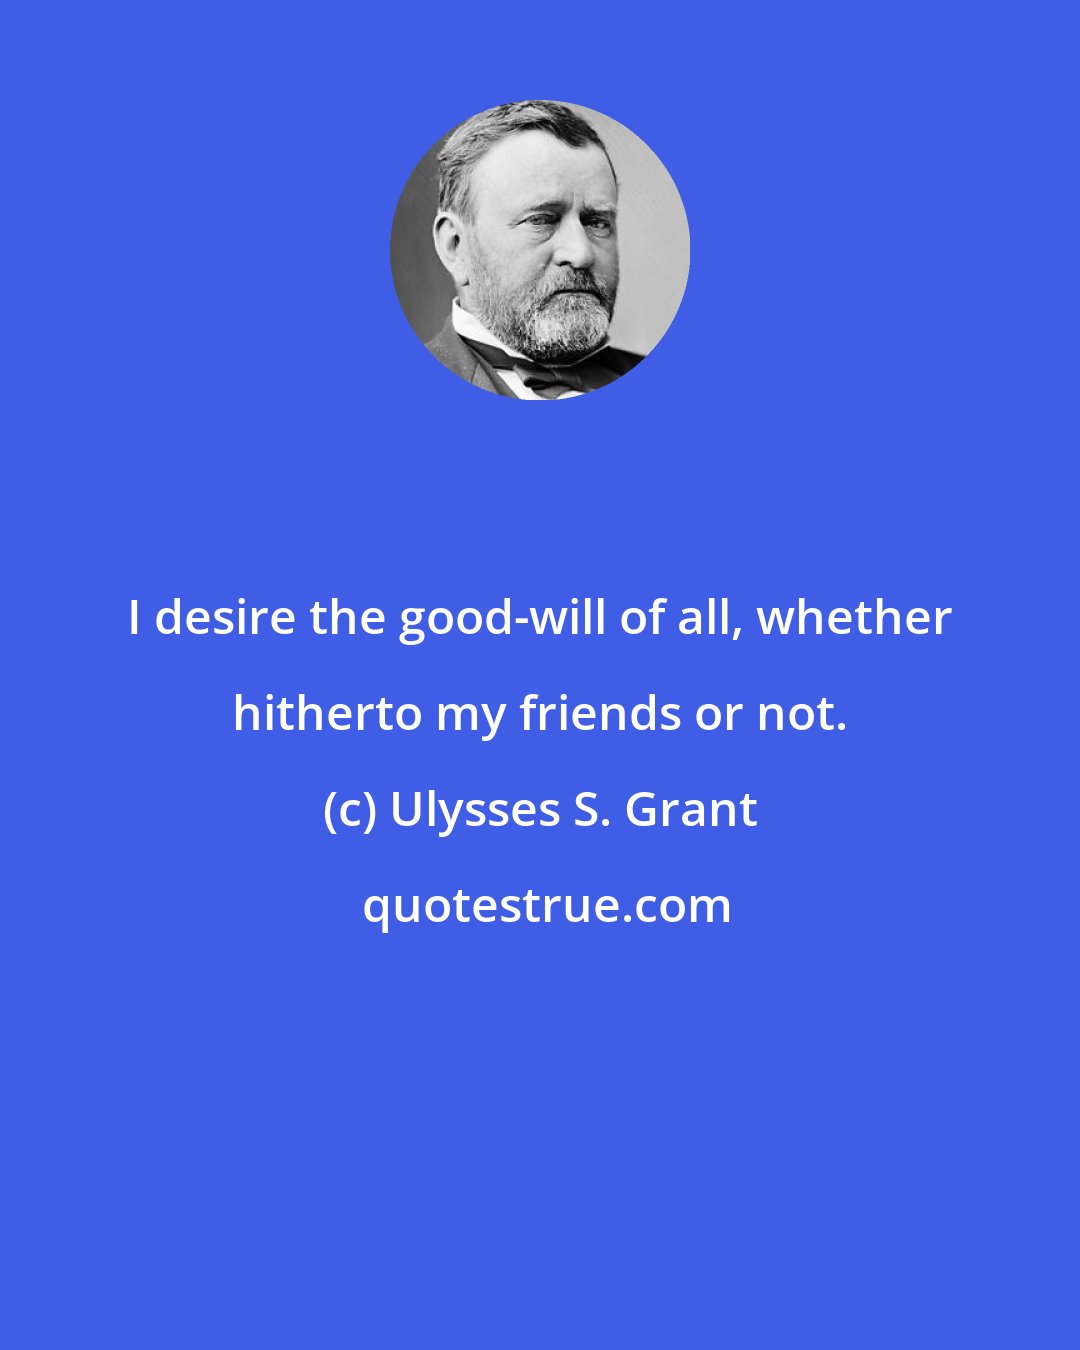 Ulysses S. Grant: I desire the good-will of all, whether hitherto my friends or not.